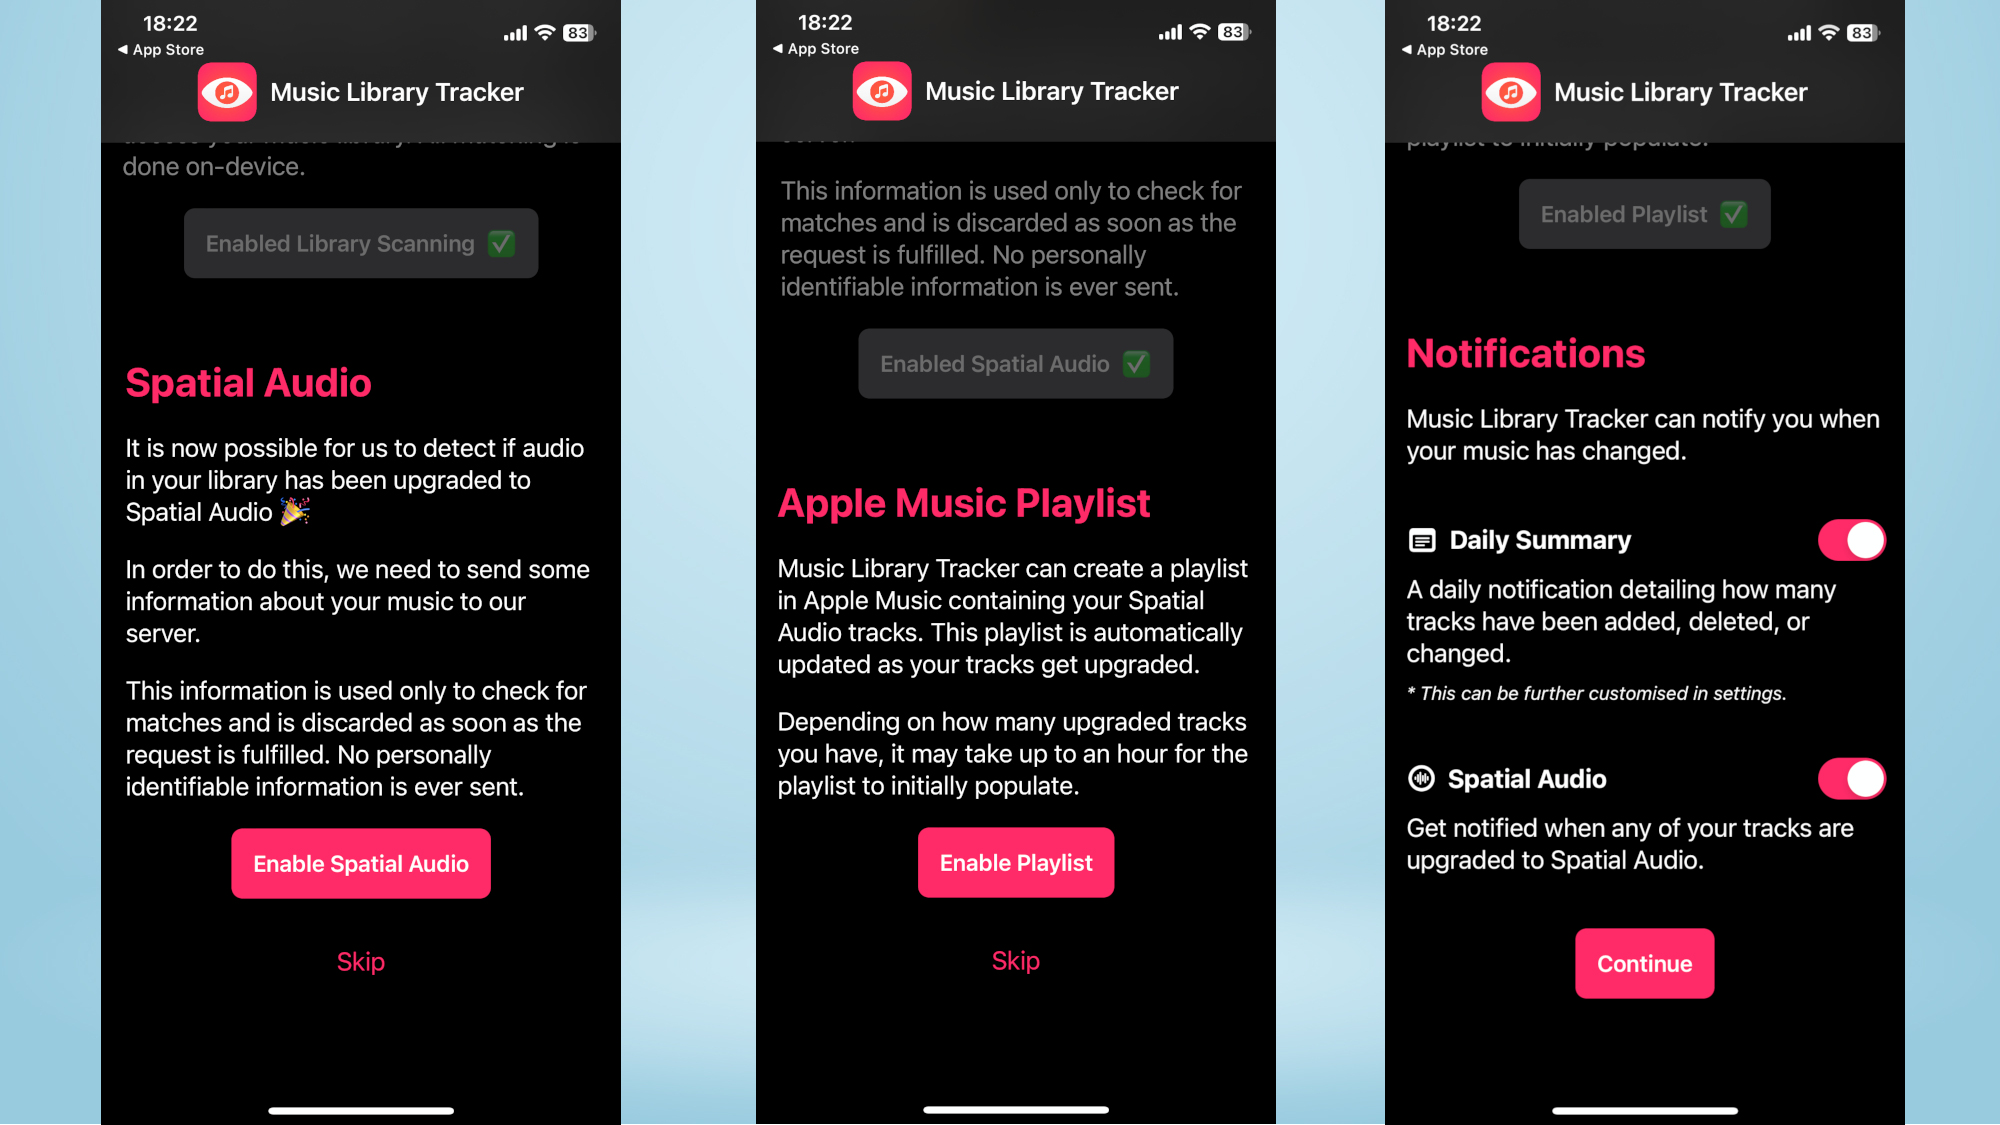 Apple Music Music Tracker Library for Spatial Audio